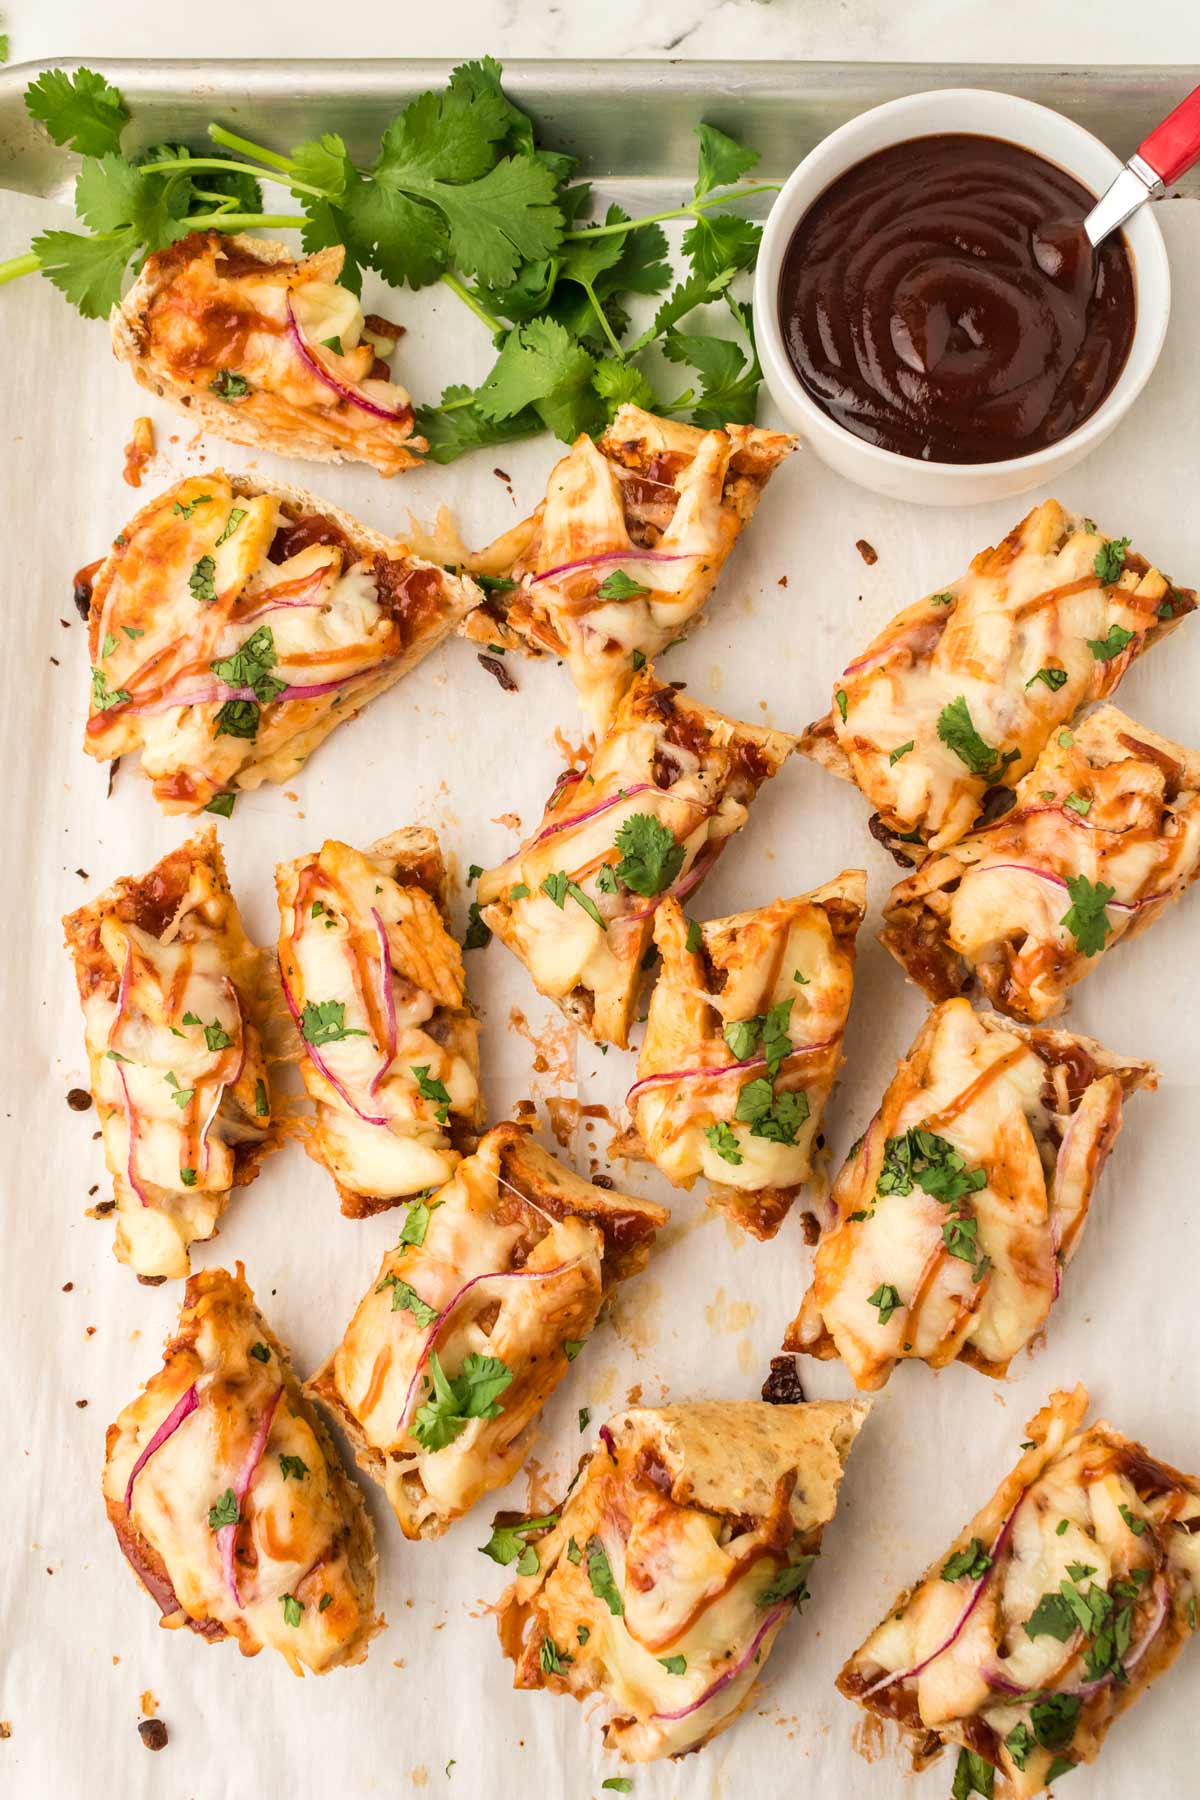 slices of French bread pizza on a pan with a bowl of BBQ sauce.